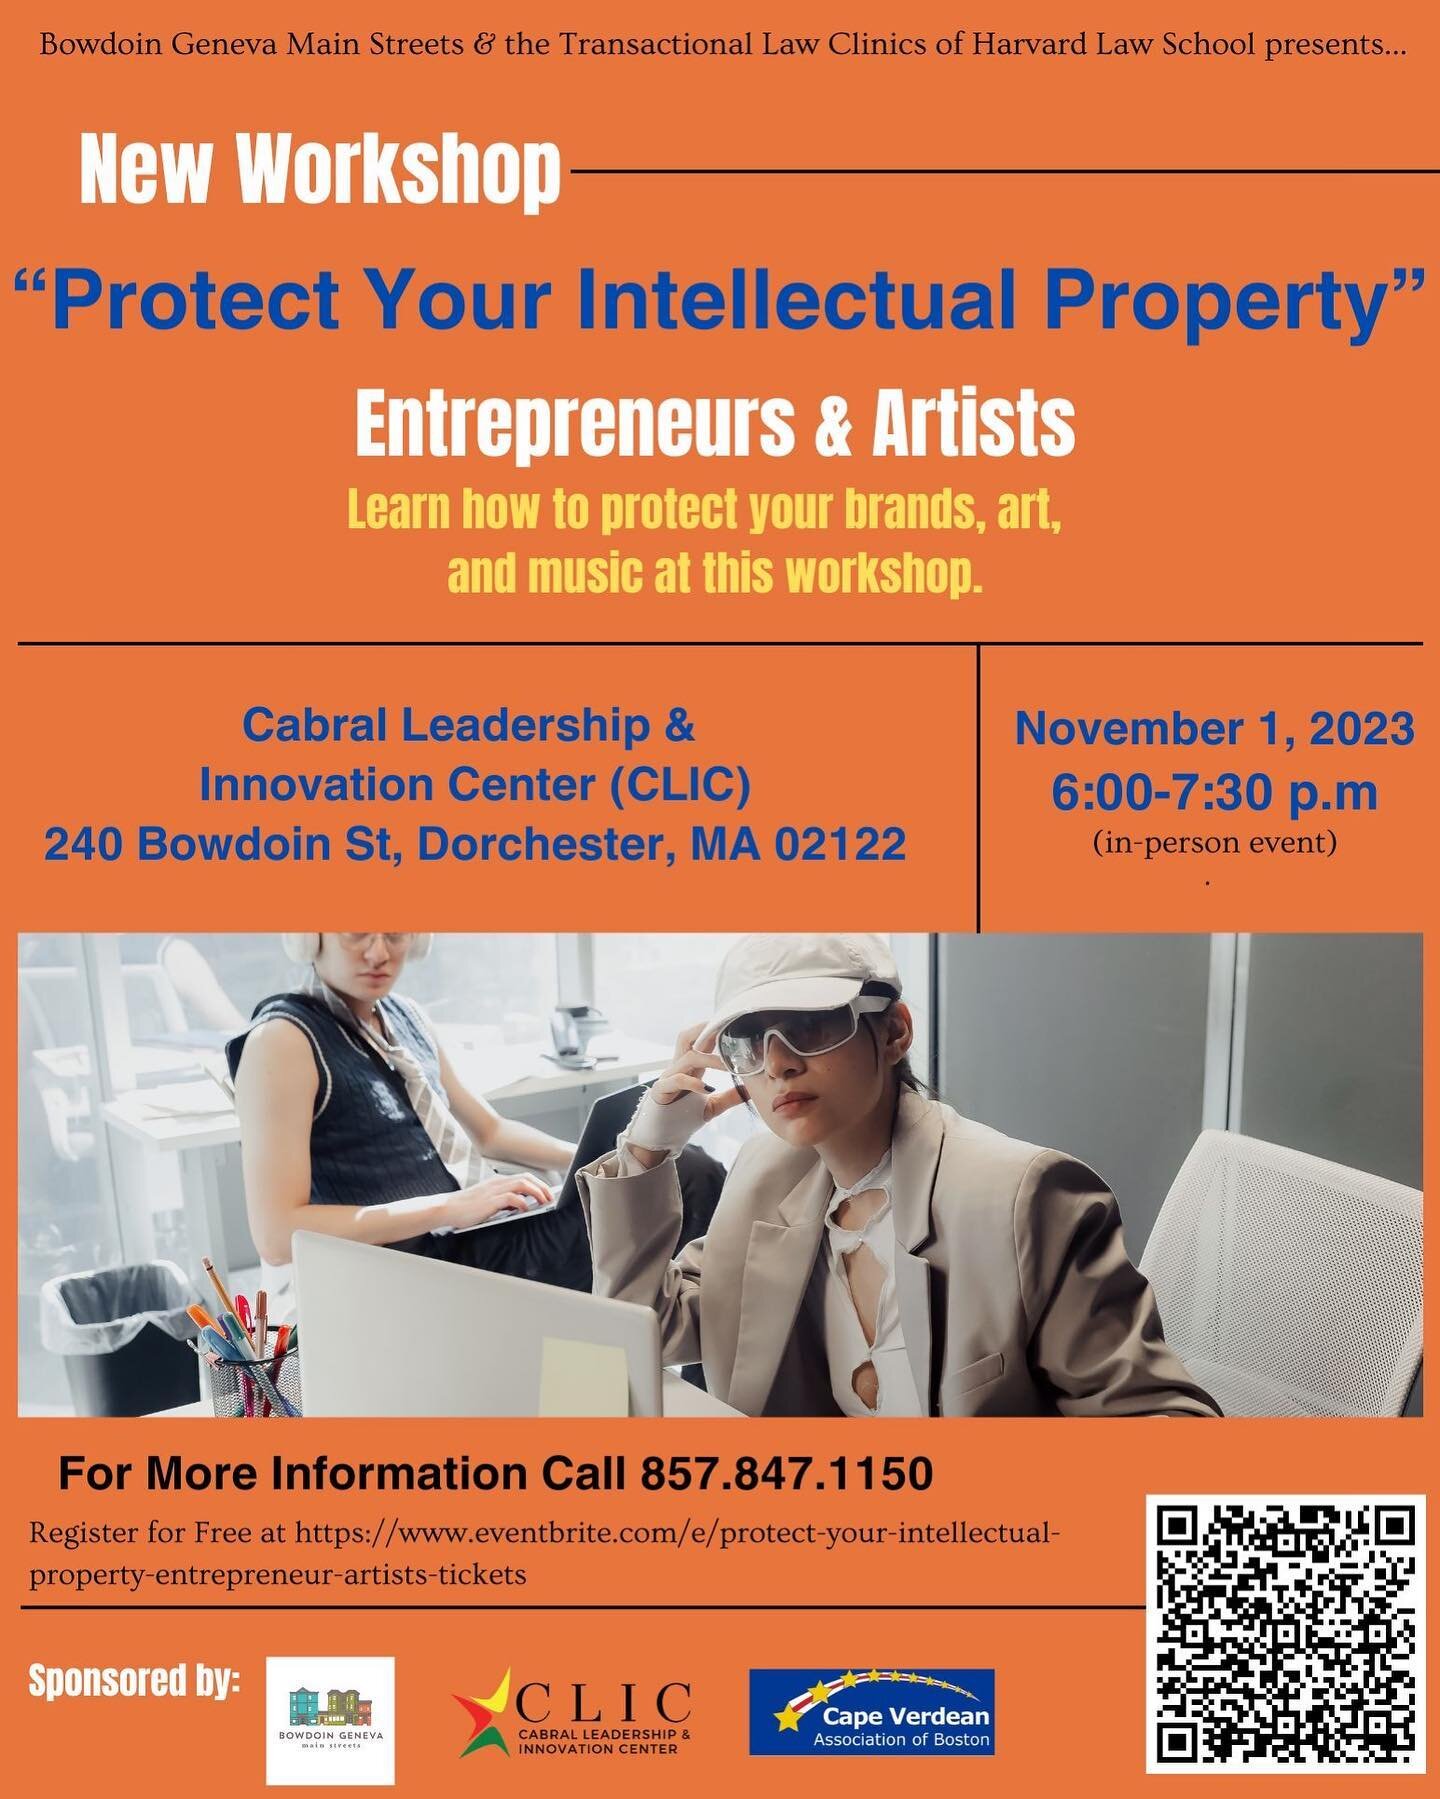 Stay Up on Game - &ldquo;Protect Your Intellectual Property&rdquo; if your an #entrepreneur or an #artist and come through to this workshop presented by the Transactional Law Clinics at Harvard Law School. Master protecting your brands, art and music